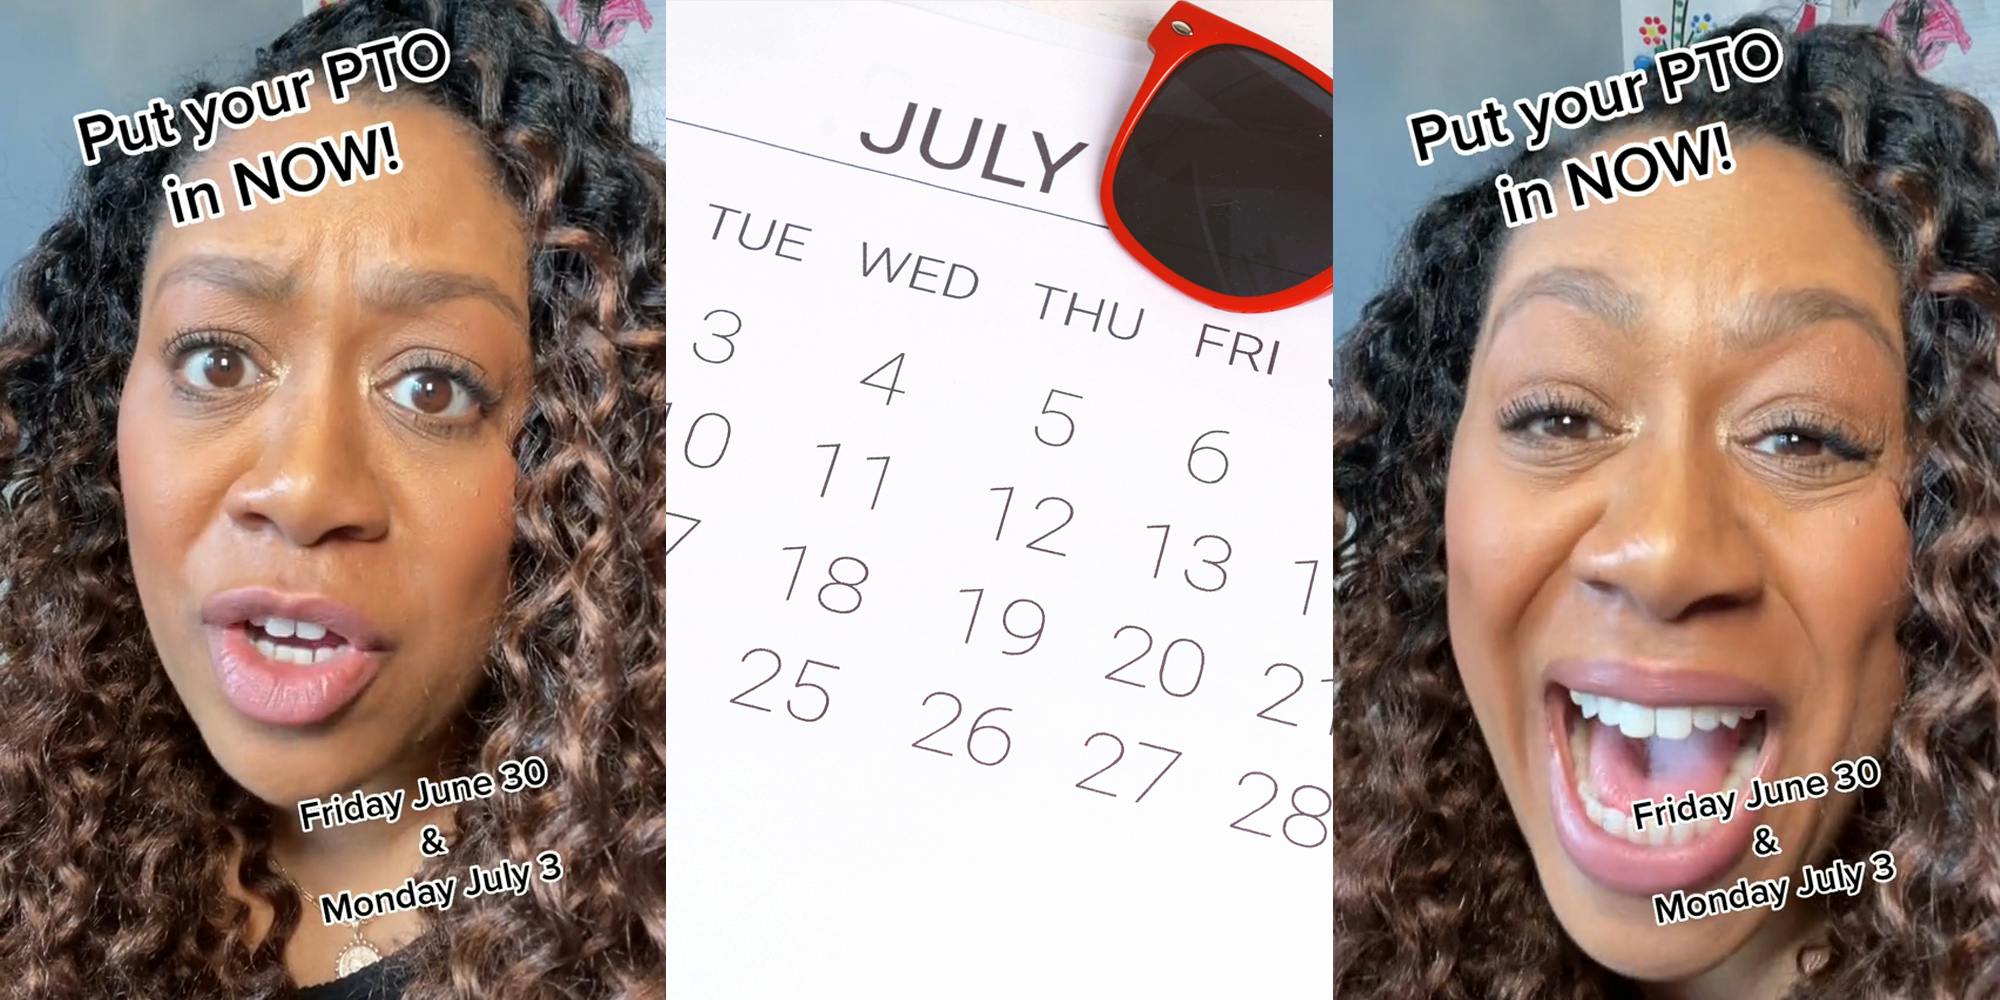 worker speaking with caption "Put your PTO in NOW!" Friday June 30 & Monday July 3" (l) July calendar with sunglasses (c) worker speaking with caption "Put your PTO in NOW!" Friday June 30 & Monday July 3" (r)